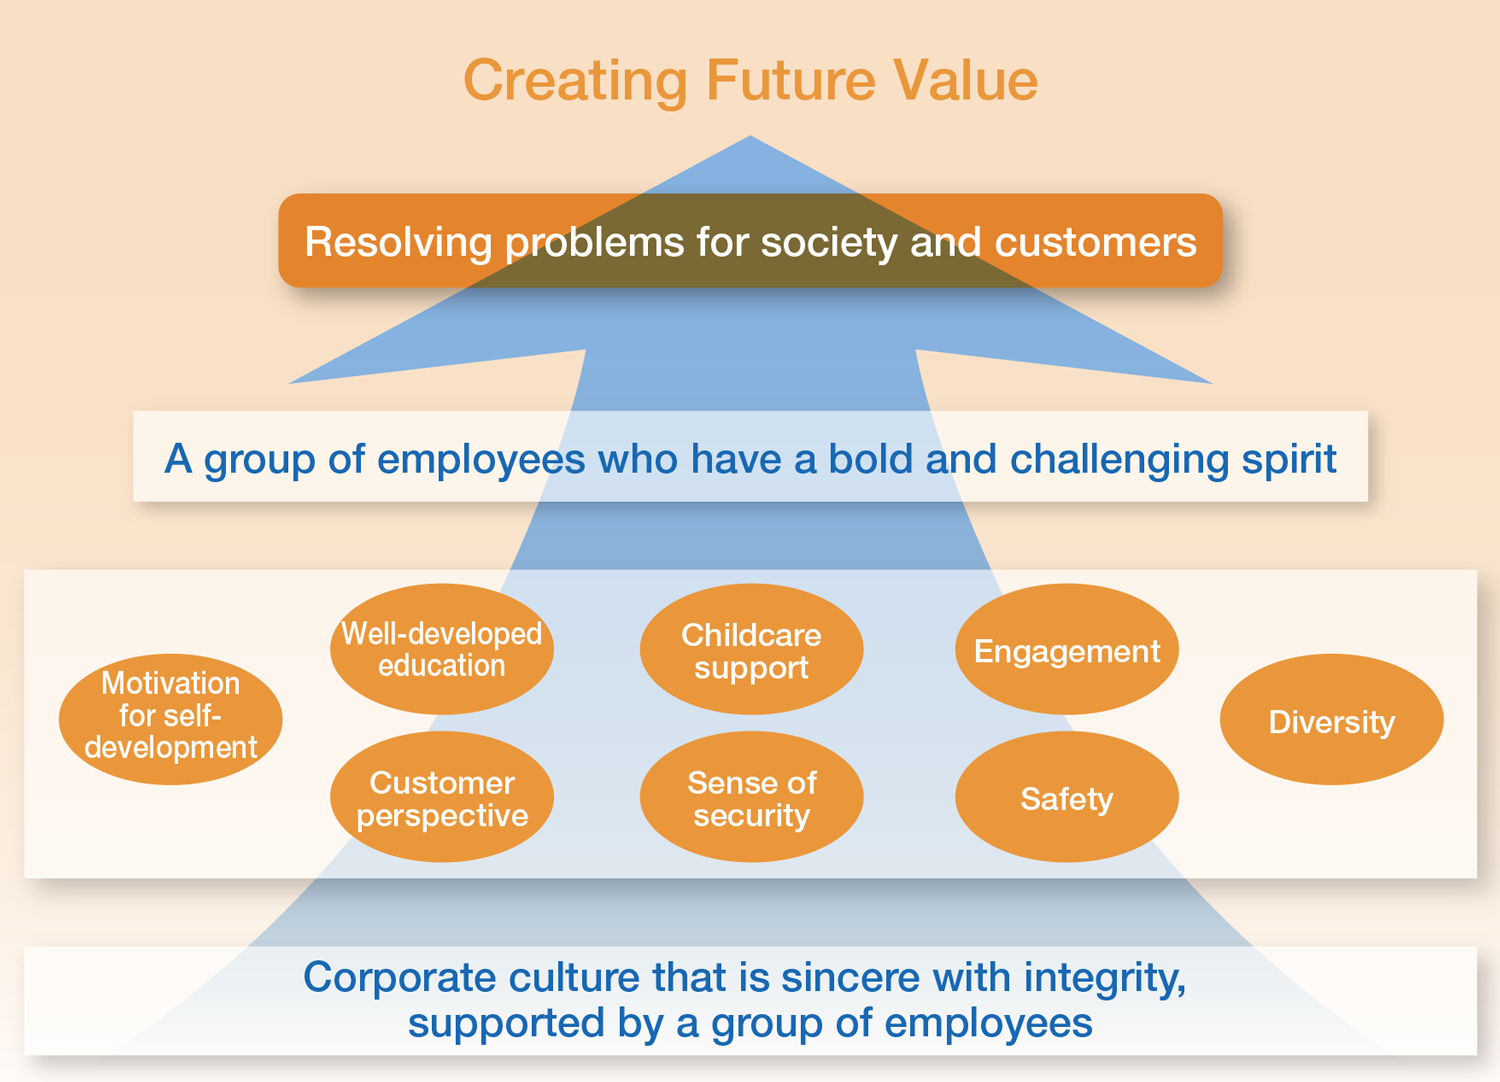 Corporate culture that is sincere with integrity, supported by a group of employees